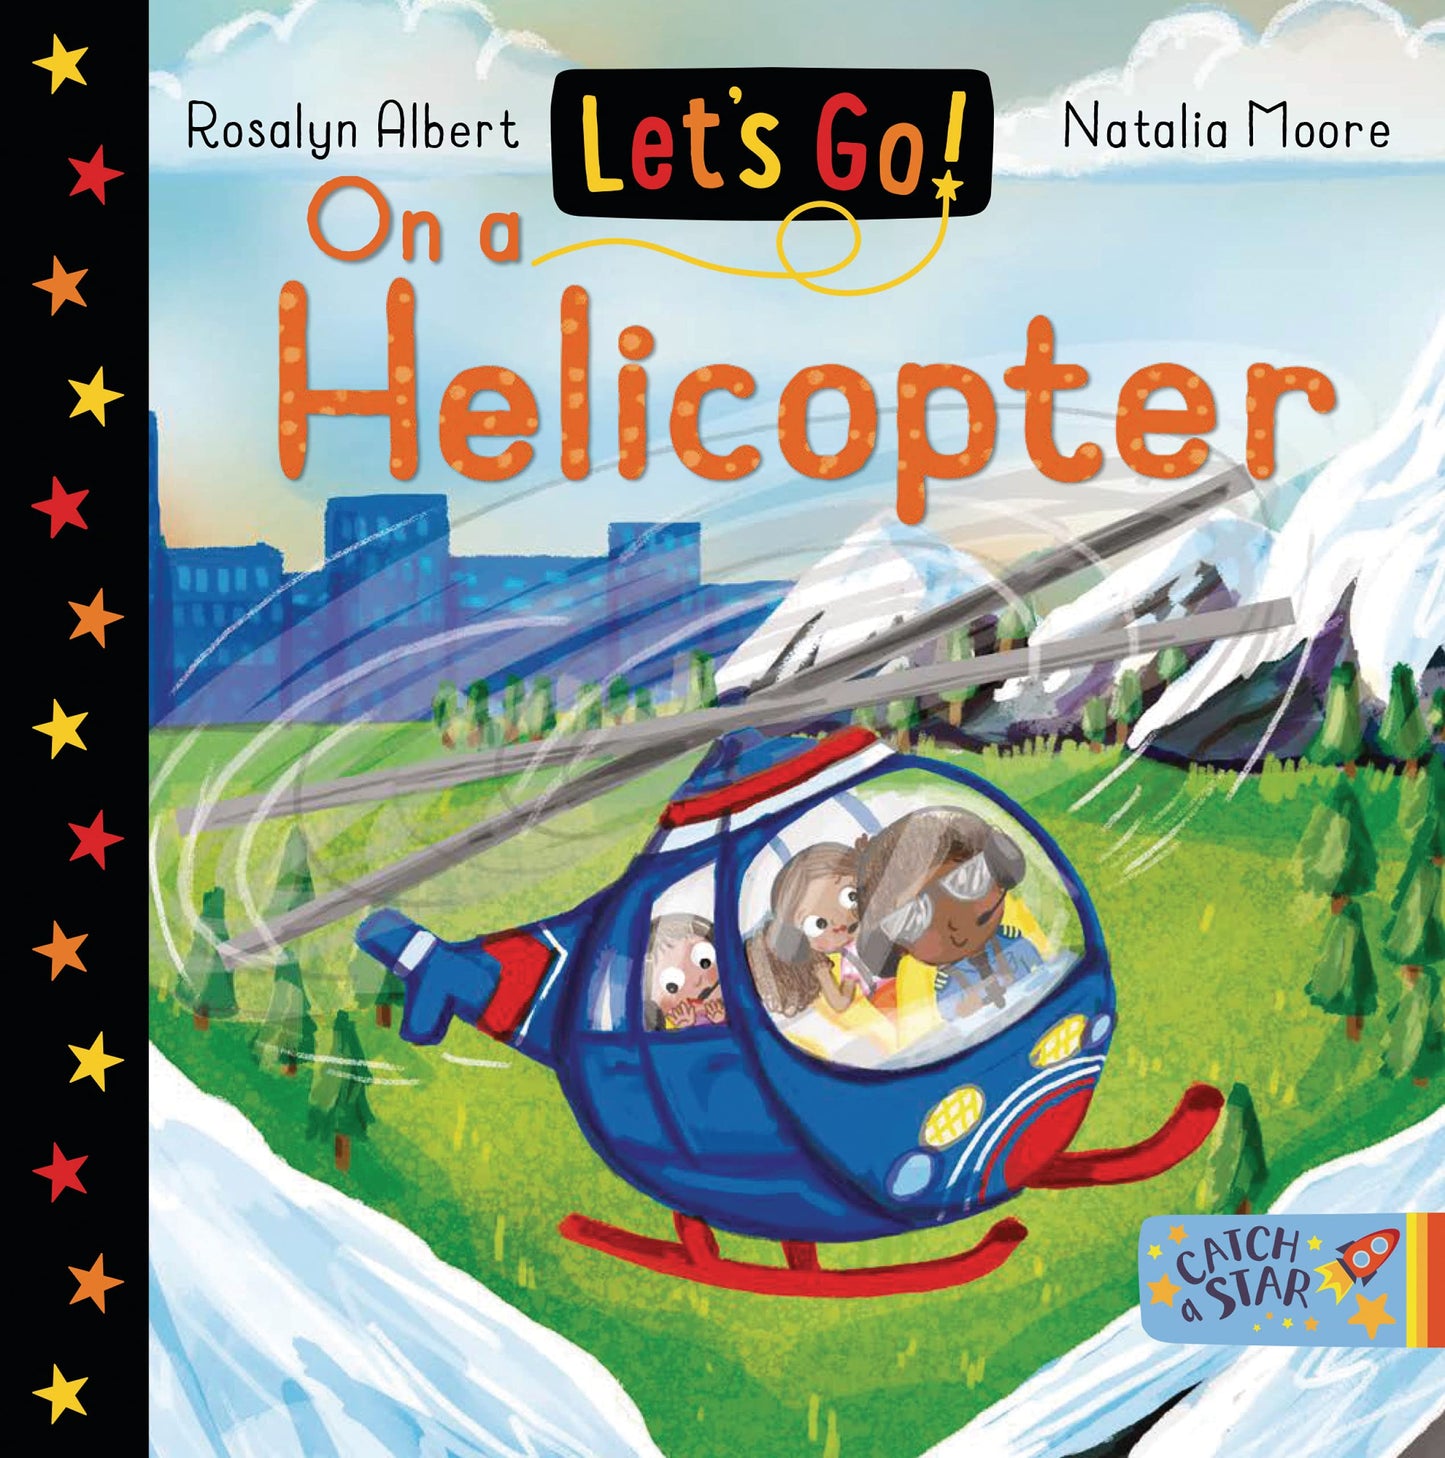 Let's Go on a Helicoptor